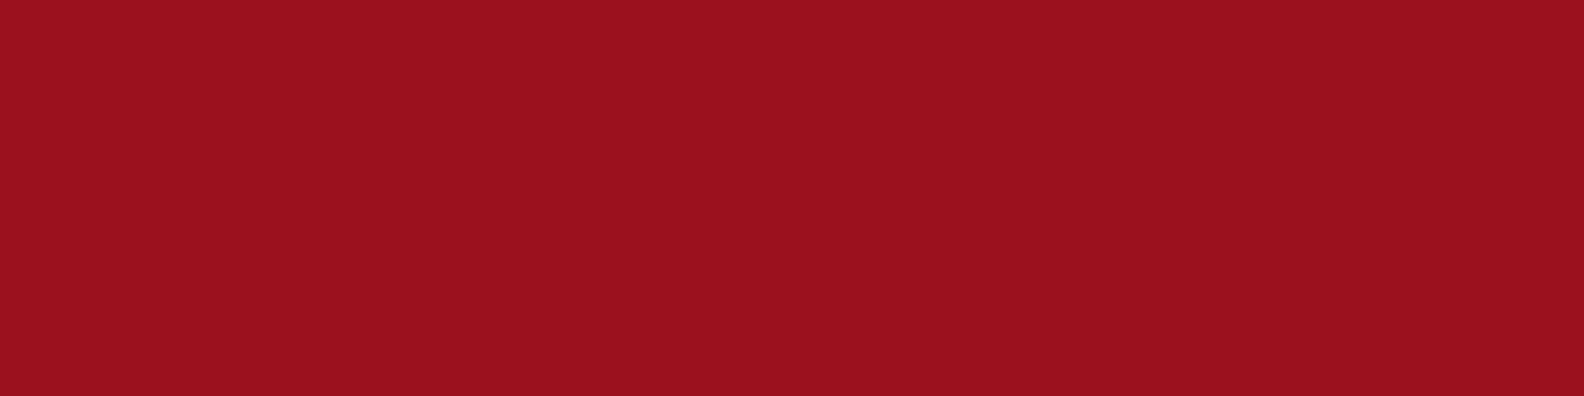 1584x396 Ruby Red Solid Color Background